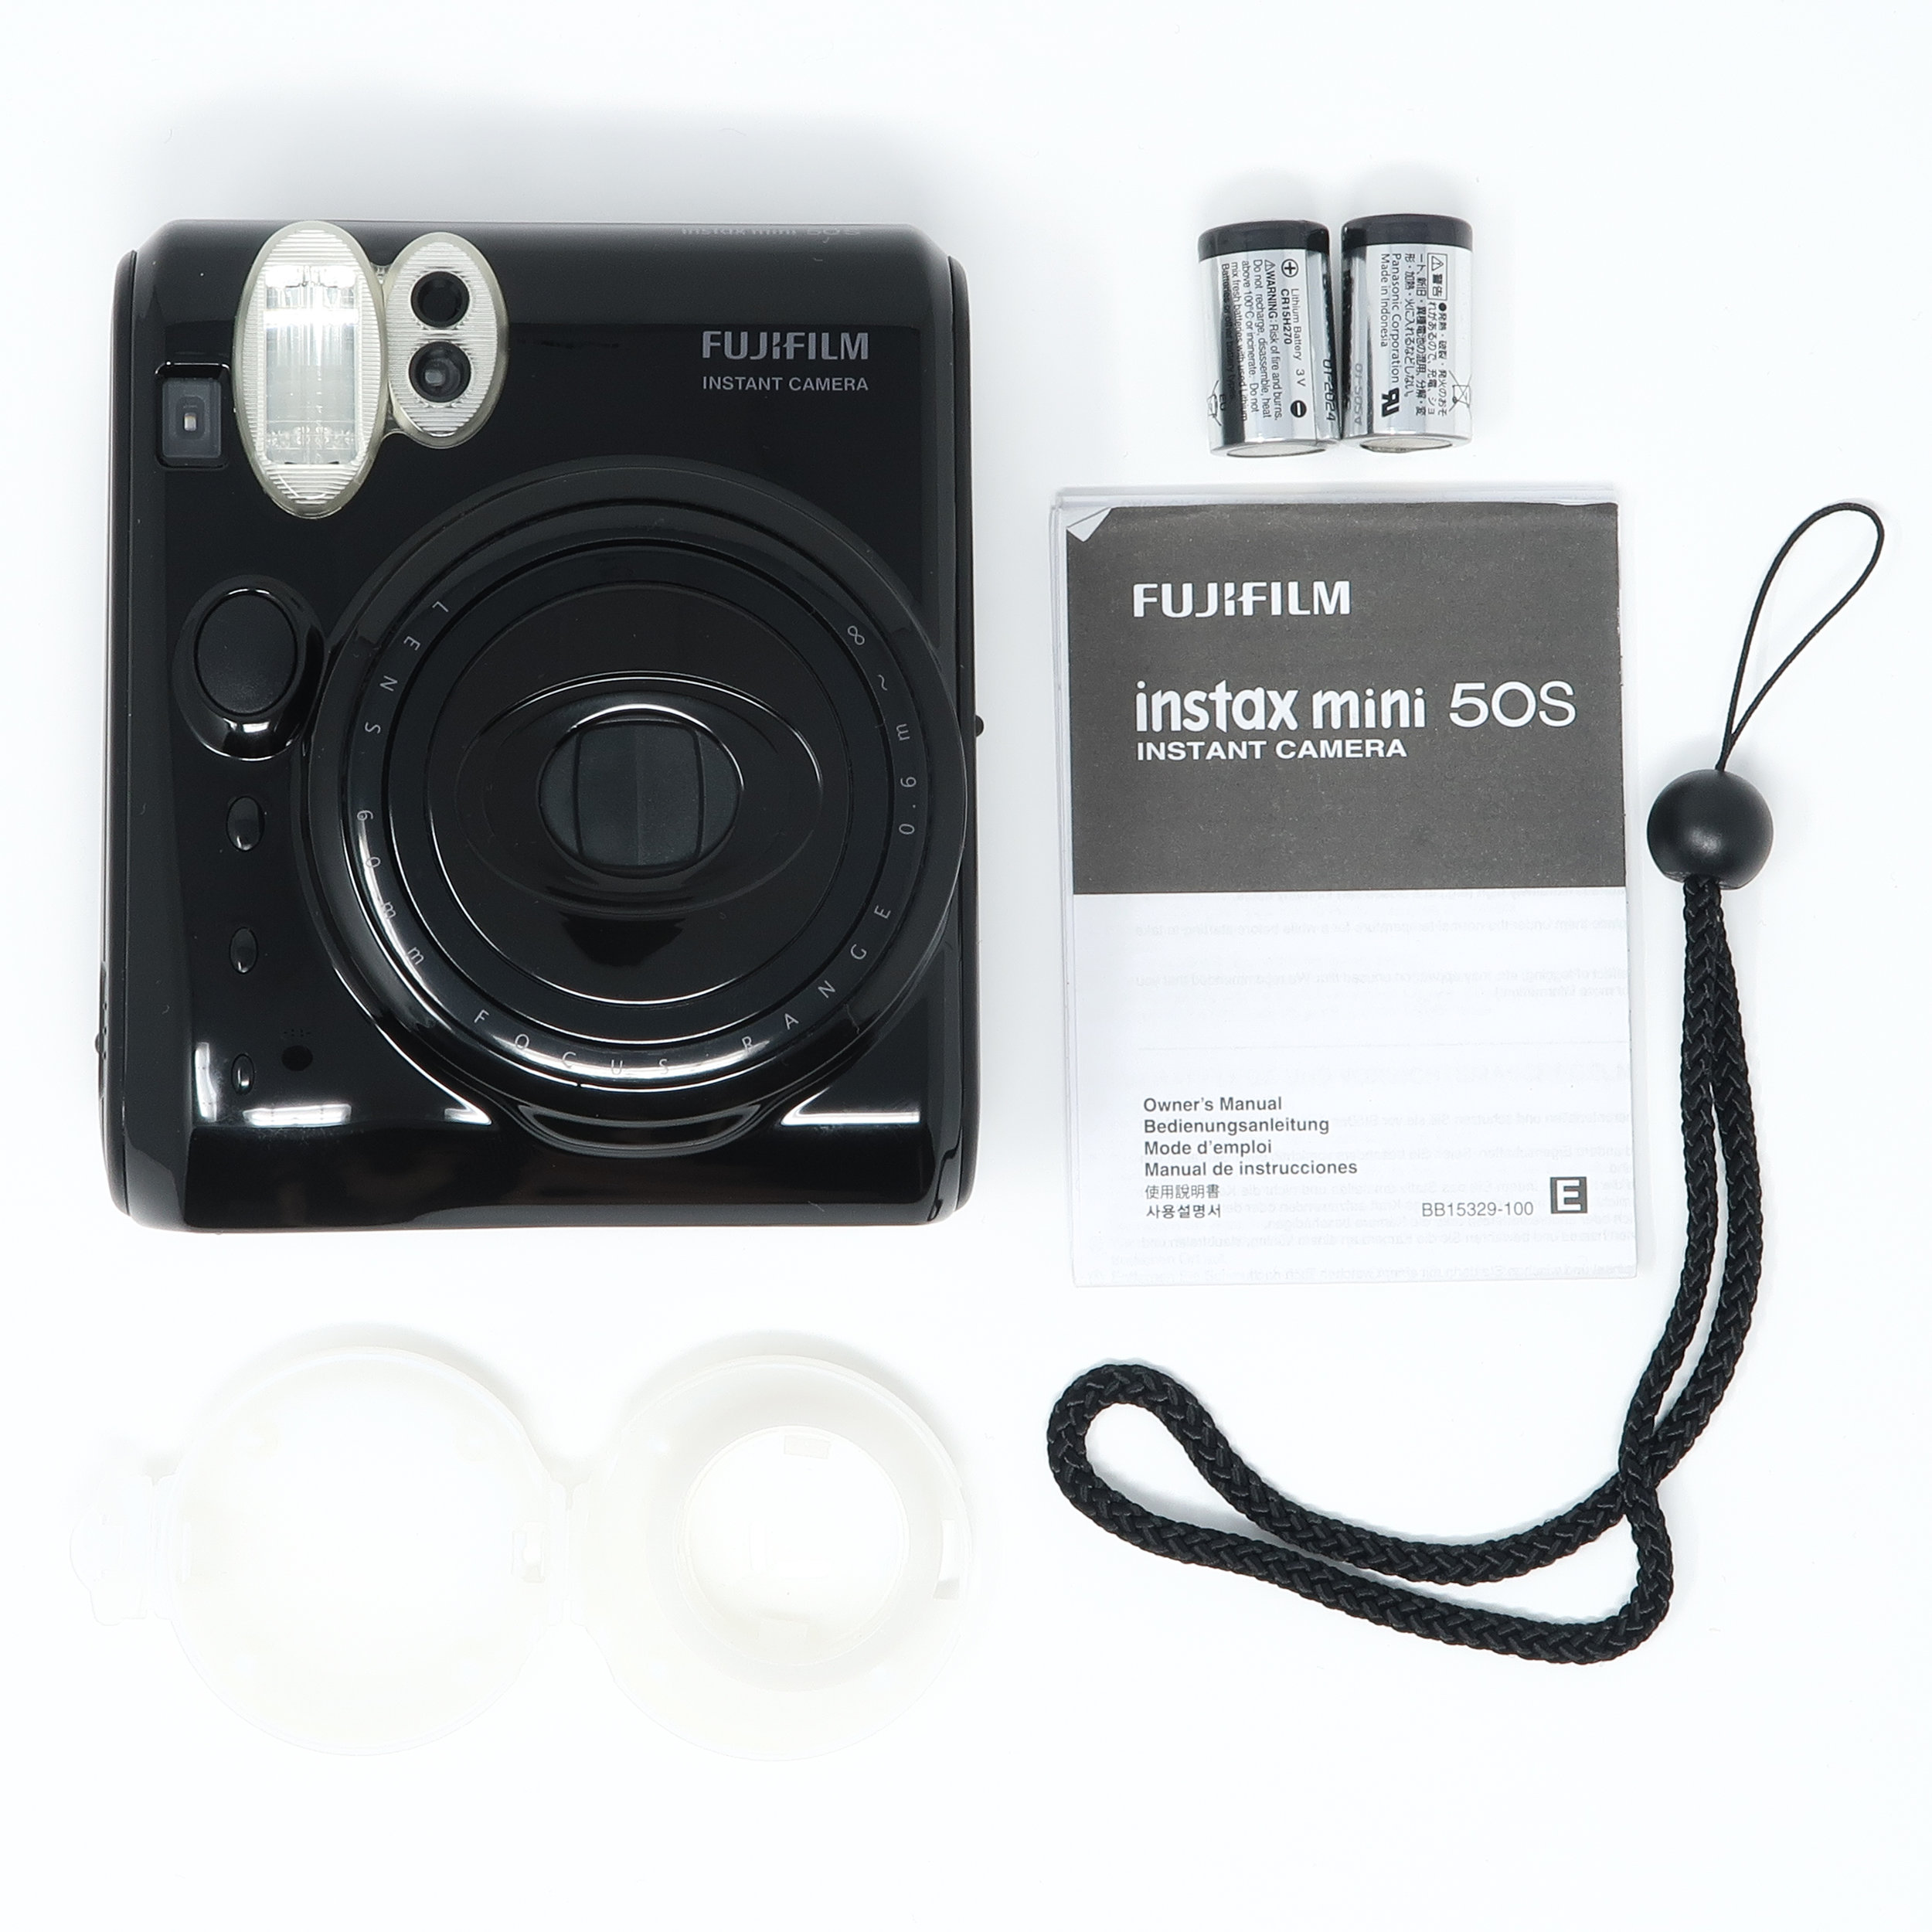 Kardinaal Nat Voordracht Fujifilm Instax Mini 50S Camera Review & How To Guide — EVERYTHING INSTAX -  Instax Camera Reviews & More